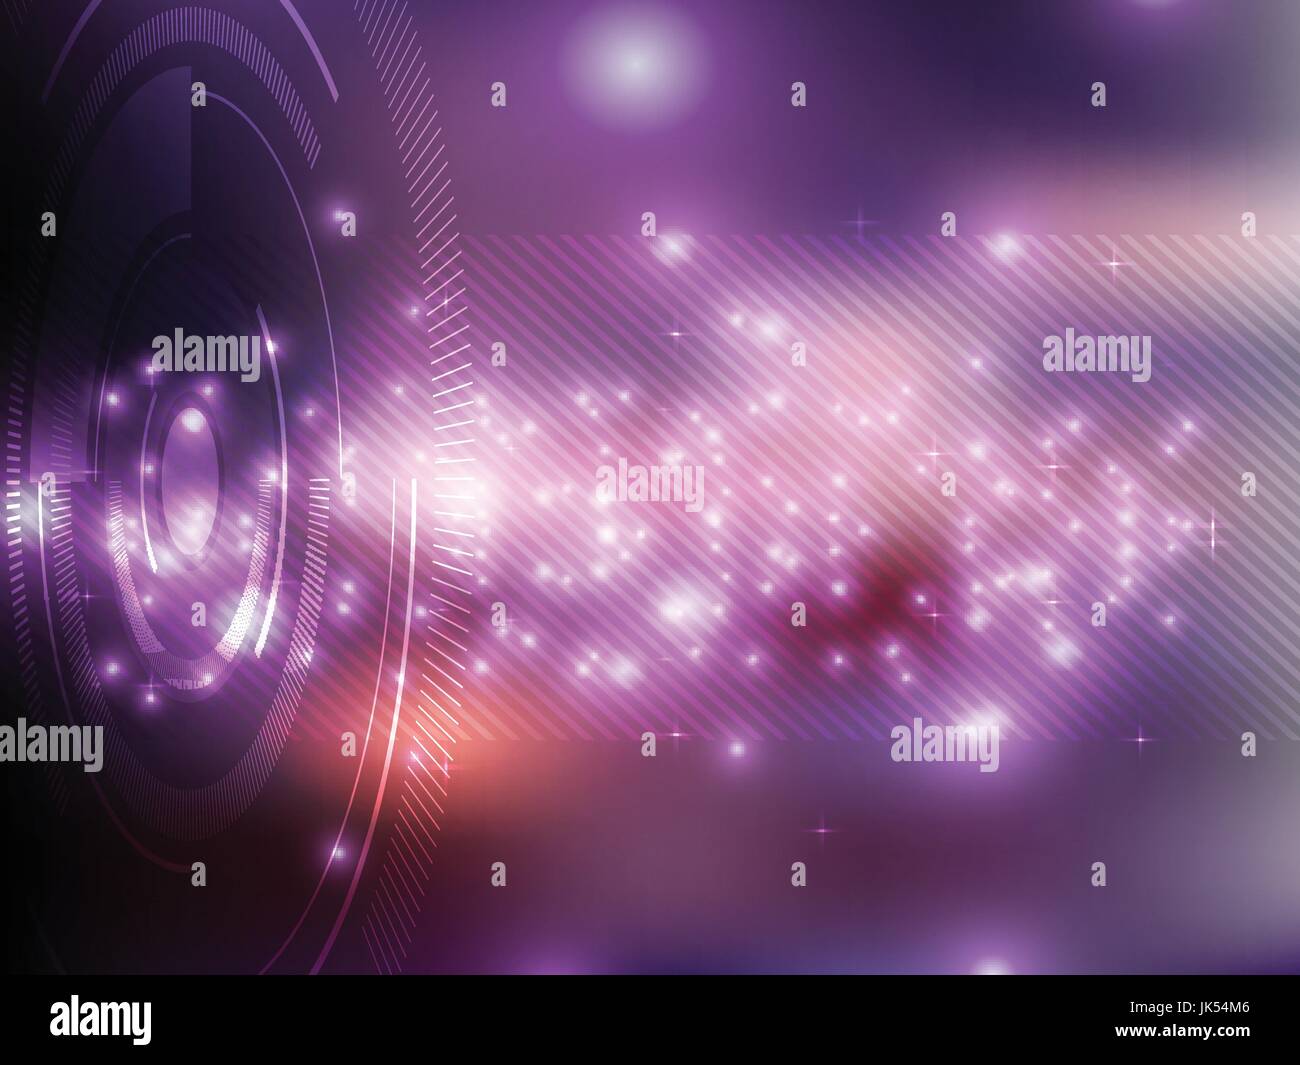 Technology background purple futuristic abstract with bright lights vector illustration Stock Vector